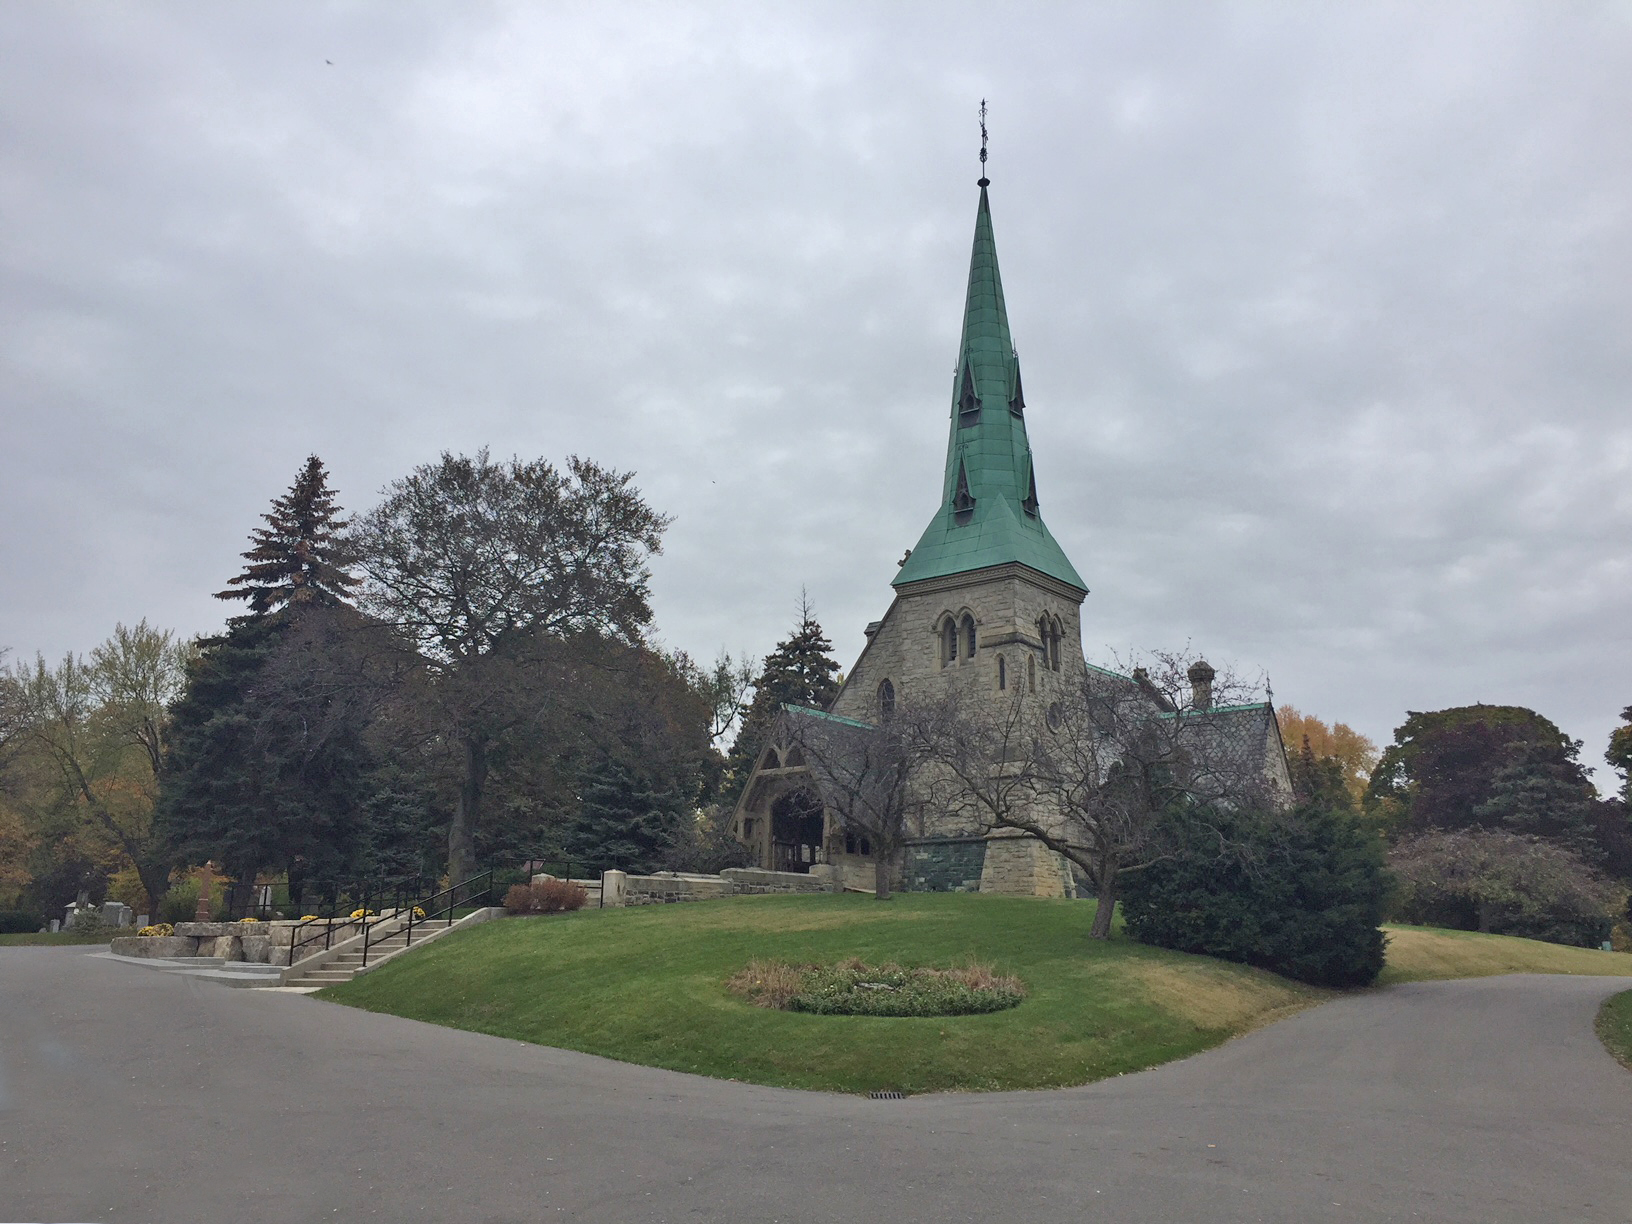 A photograph of St. James 'the Less' Anglican Church in Toronto, Ontario. The stone church has a large bronze steeple that has aged green.